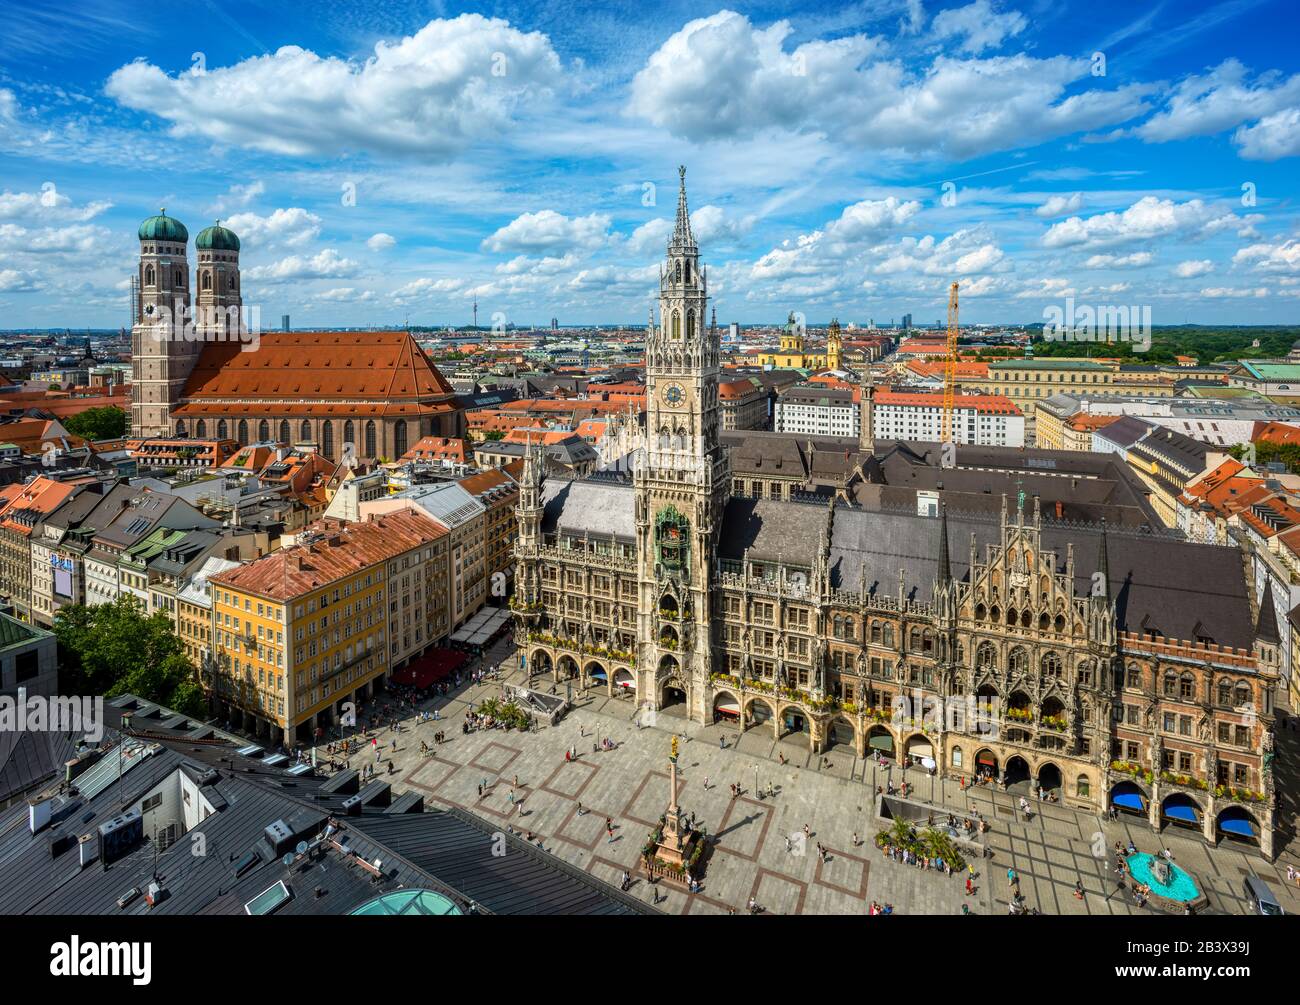 Munich city, Germany, view of the Marienplatz central square, New Town Hall building and the Cathedral Stock Photo